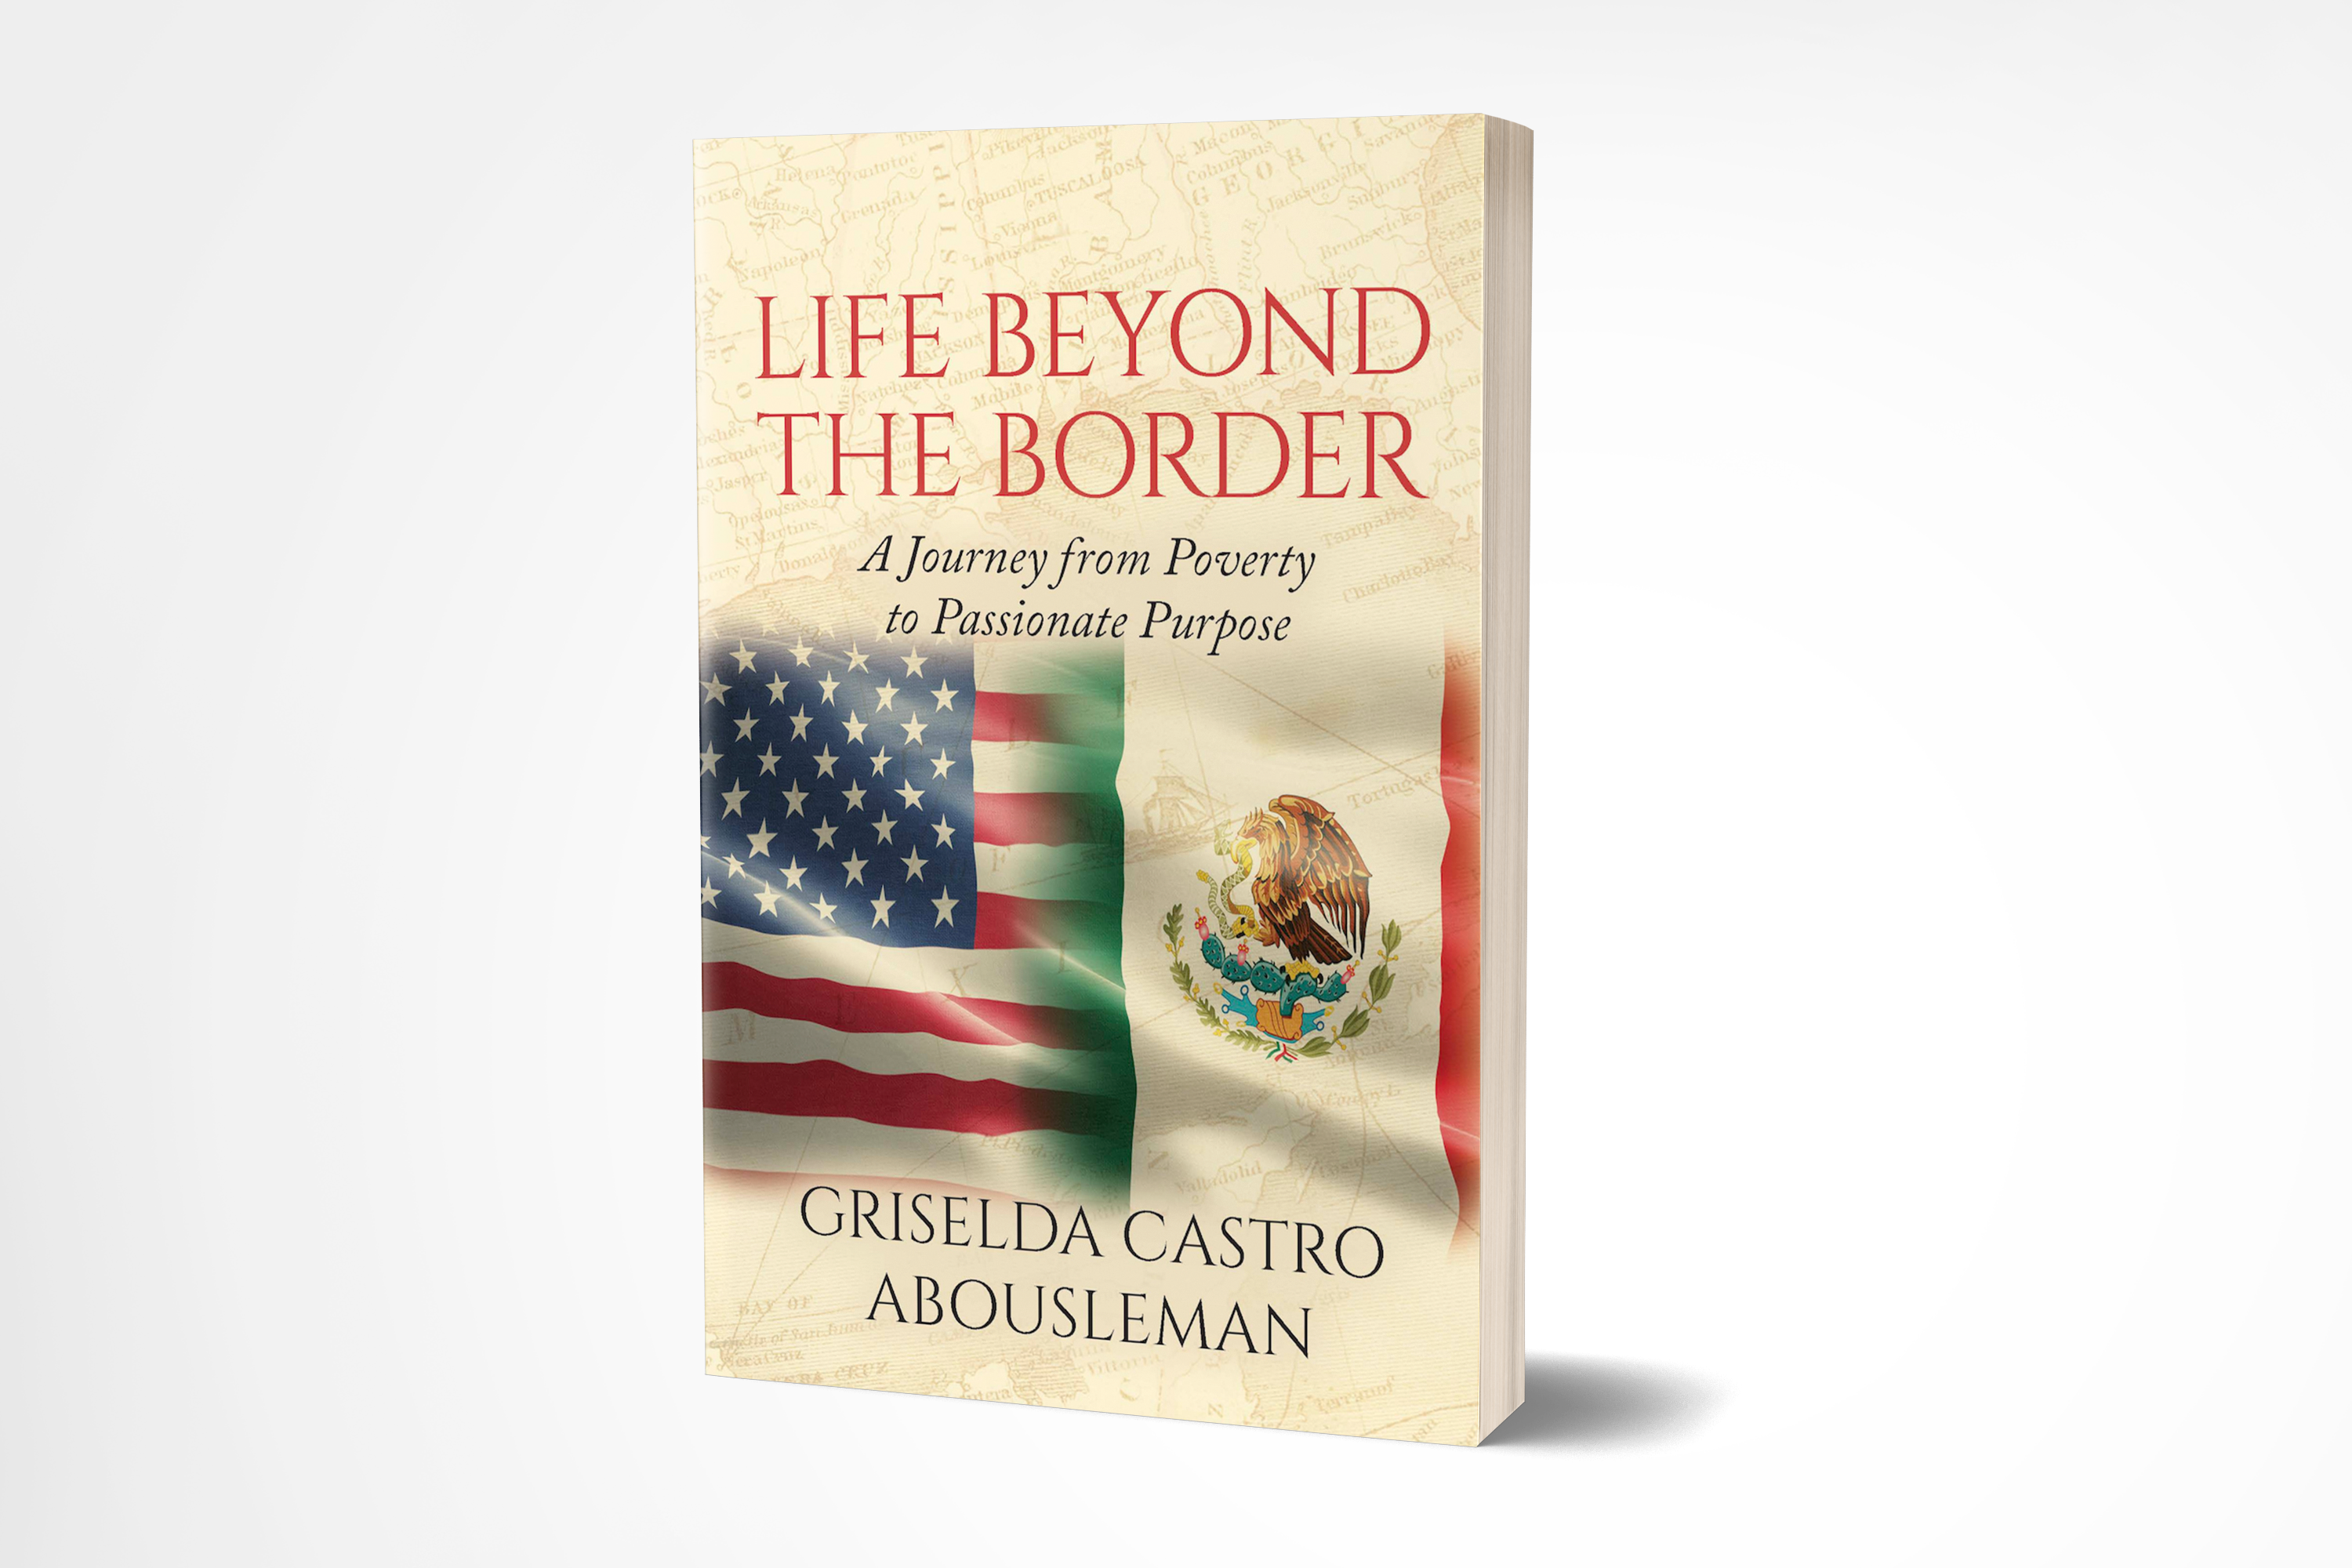 Life Beyond the Border: A Journey from Poverty to Passionate Purpose